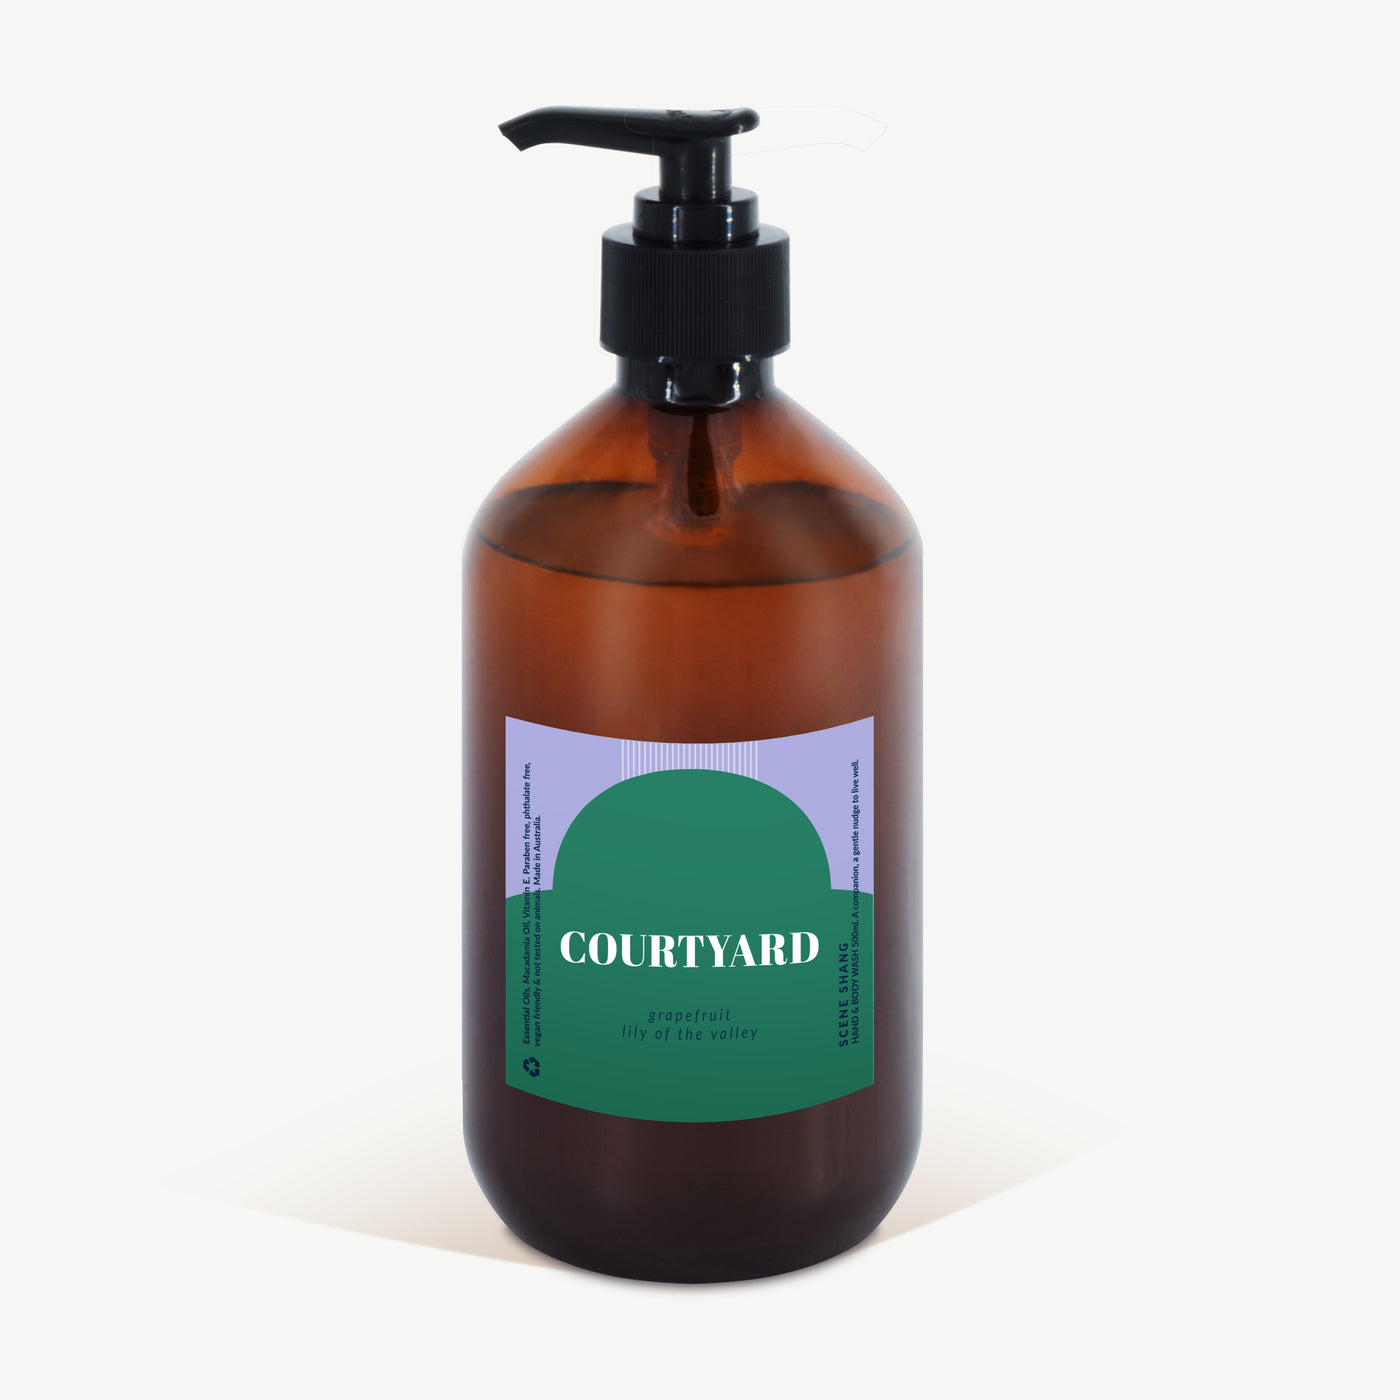 COURTYARD Hand & Body Wash (Grapefruit, Lily of the Valley)